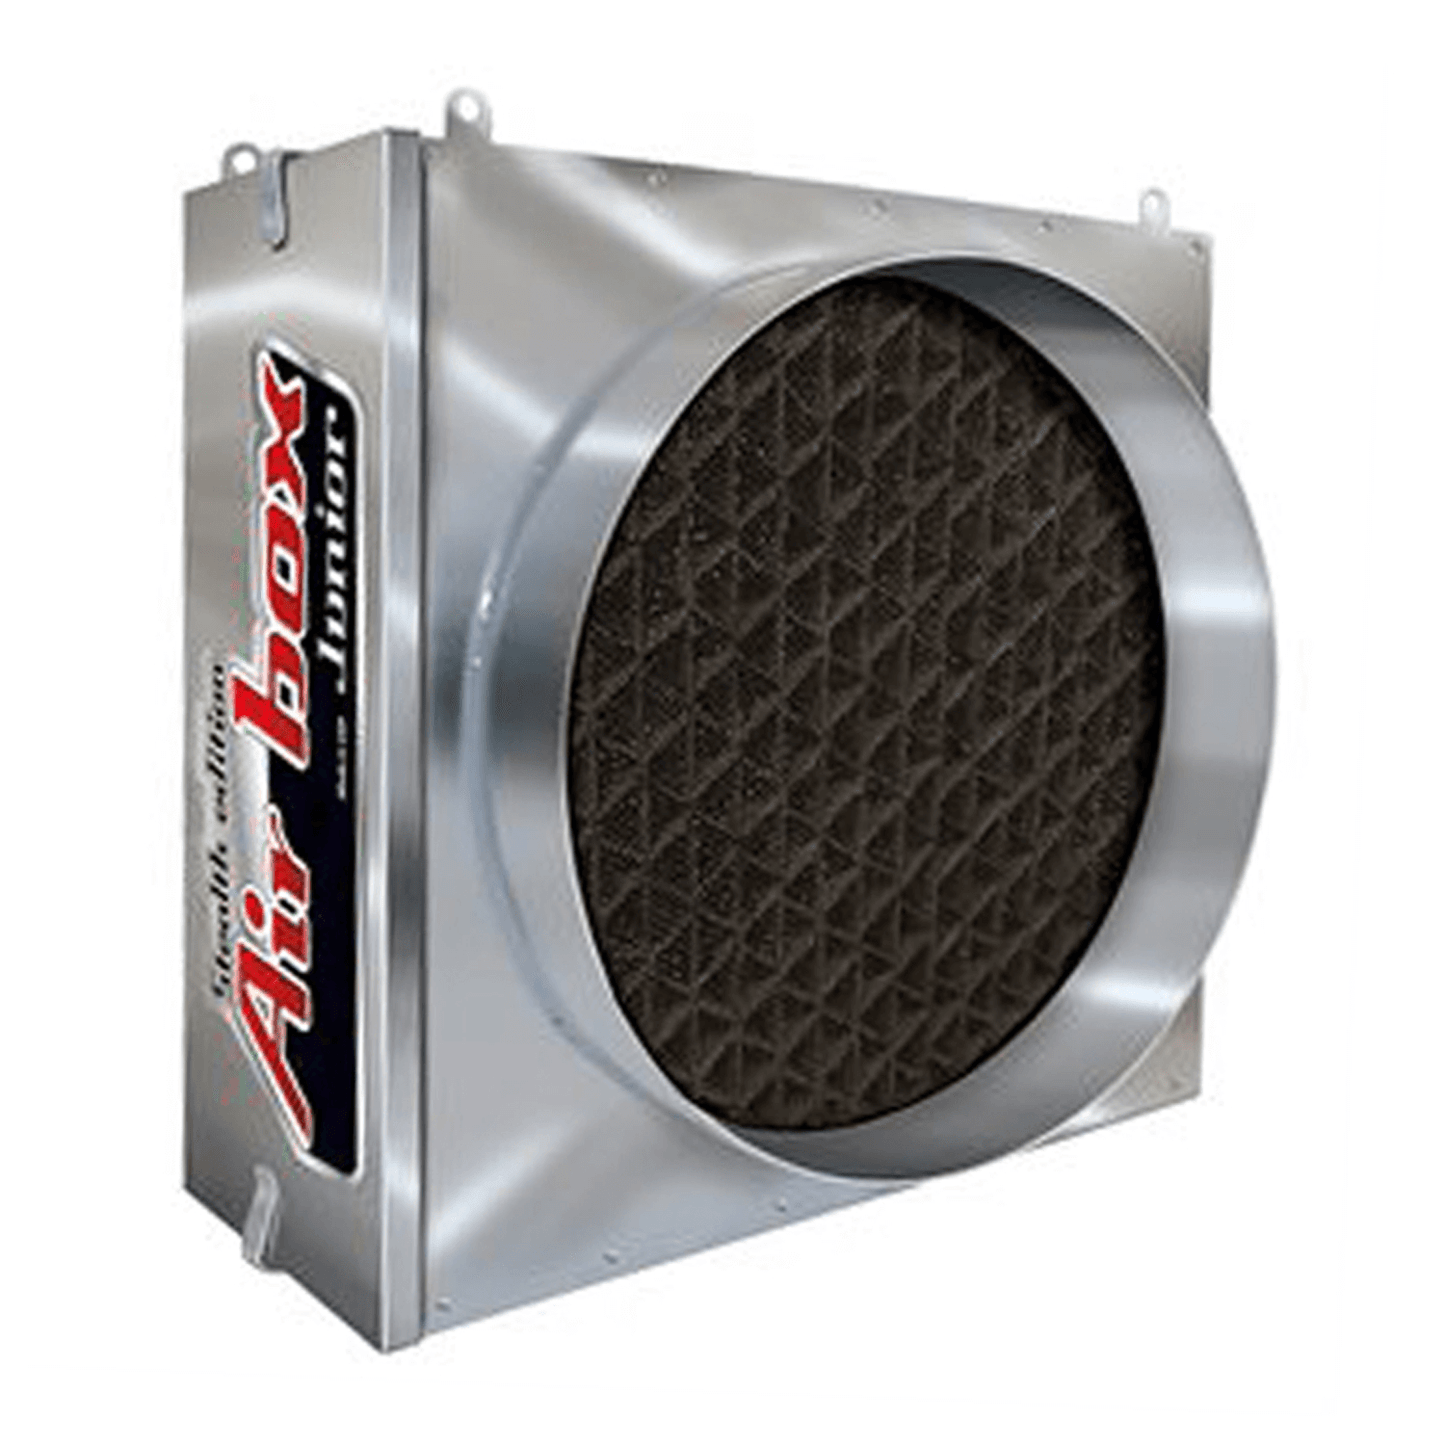 Air Box Jr Exhaust COCO Carbon Filter | HT4543-C | Grow Tents Depot | Climate Control |